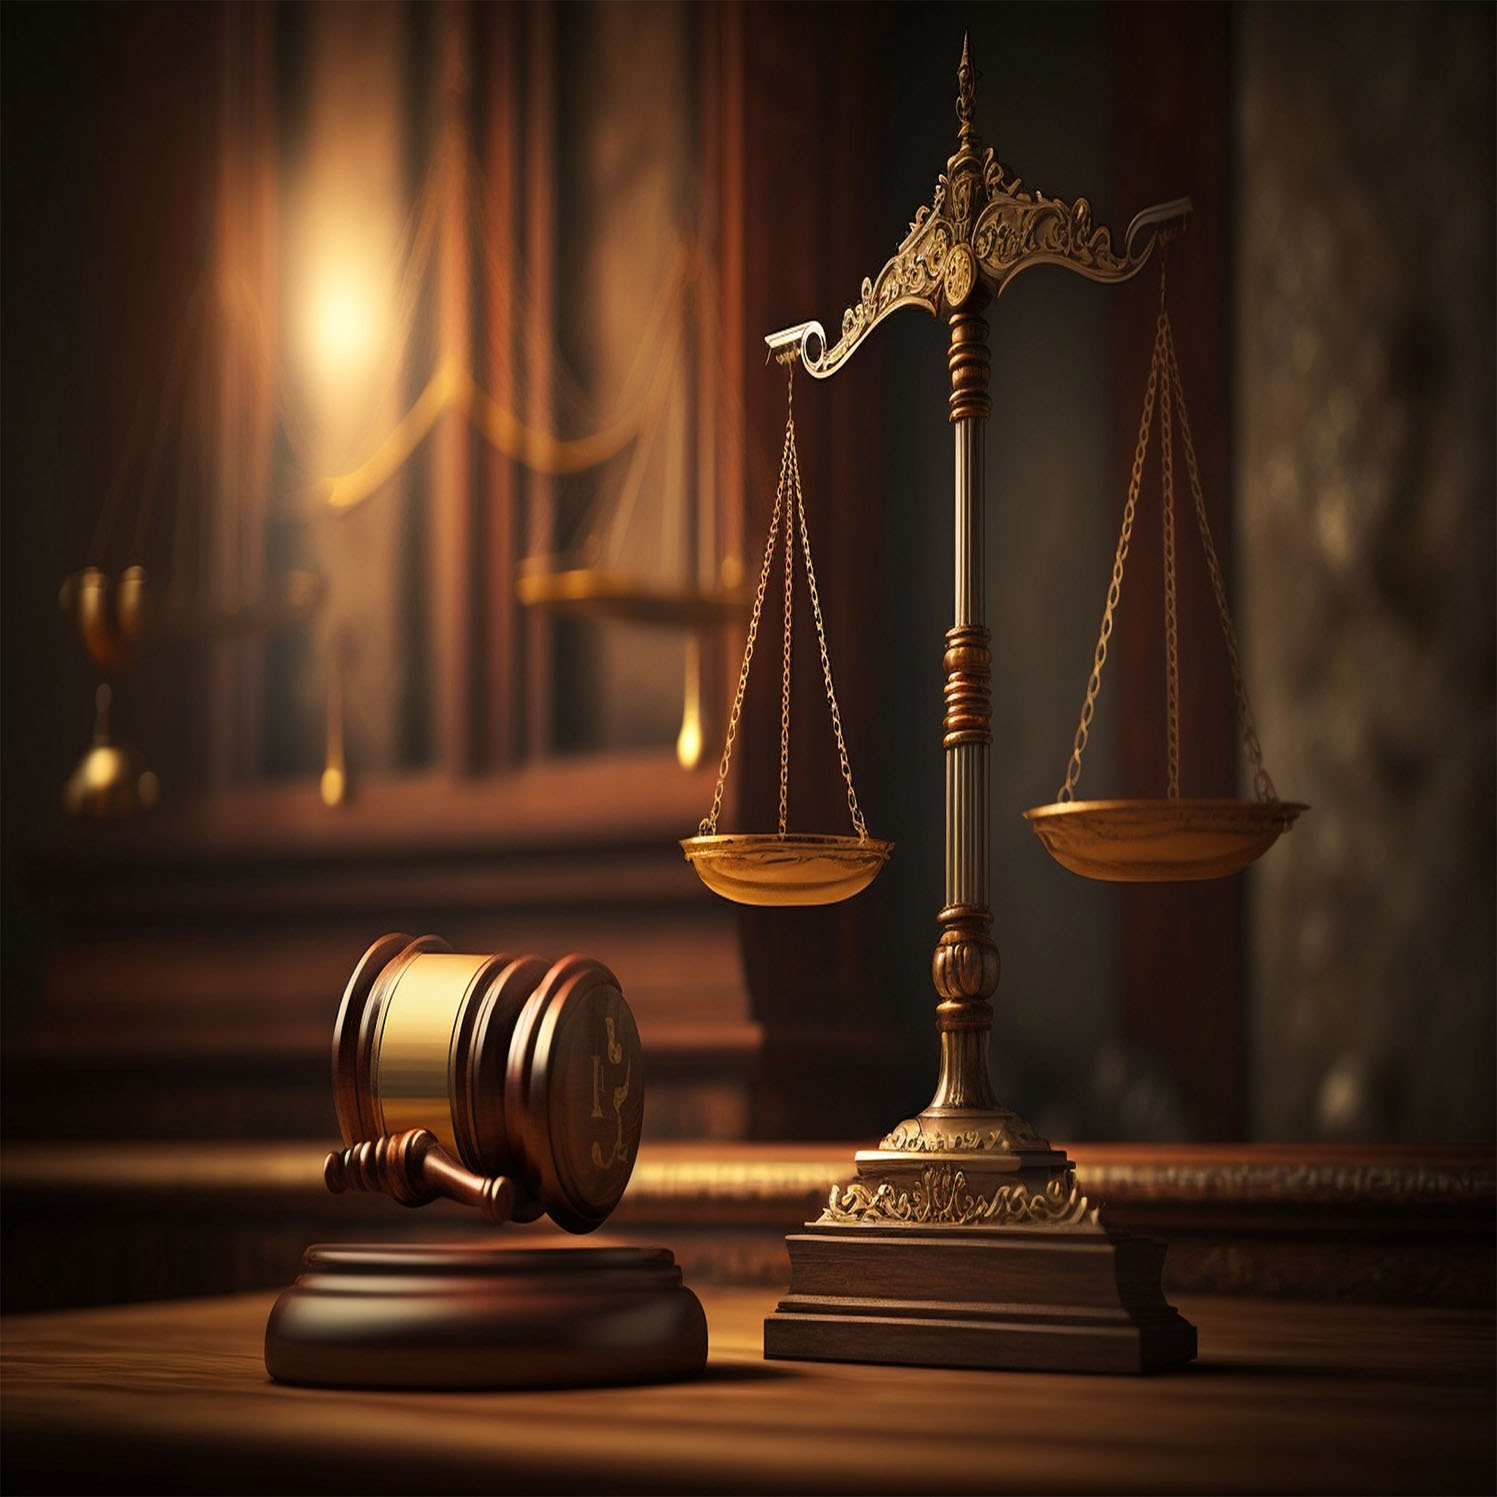 Scales of justice and a gavel sitting on a desk